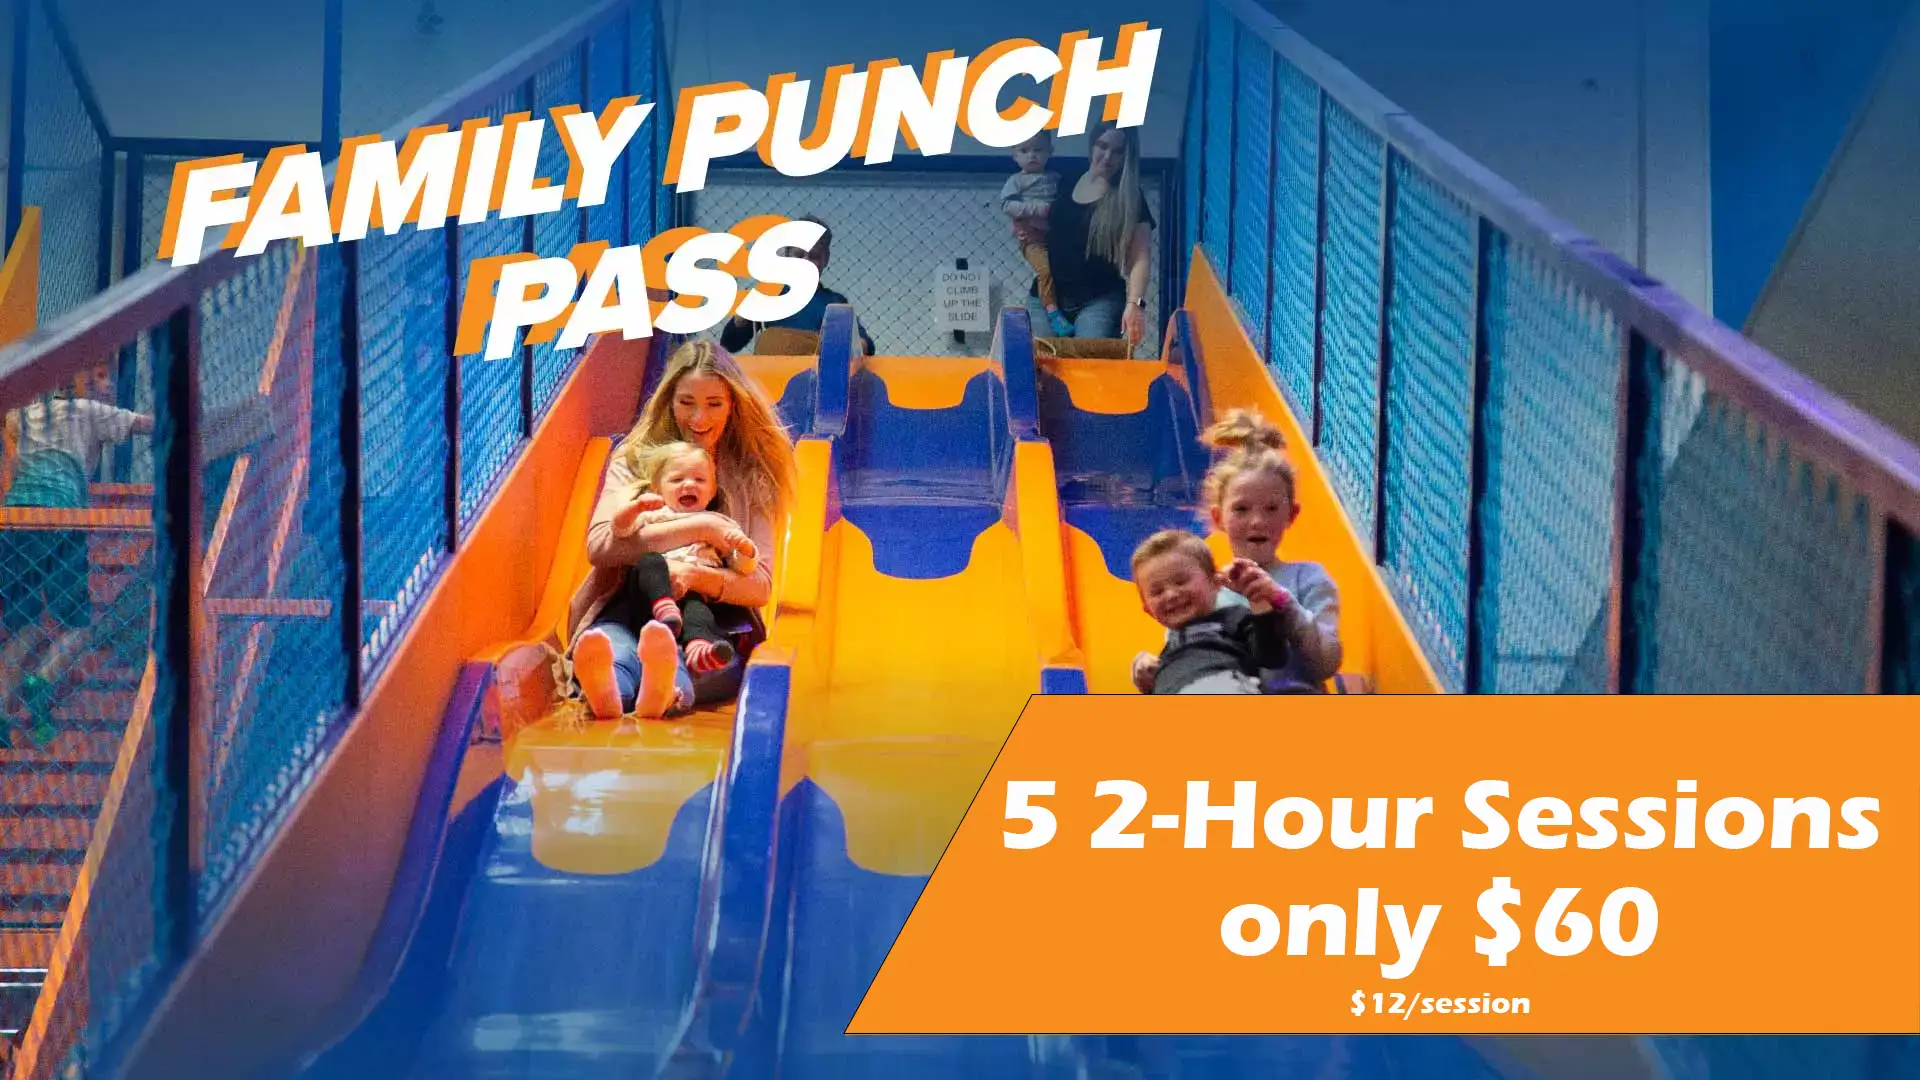 Family Punch Pass